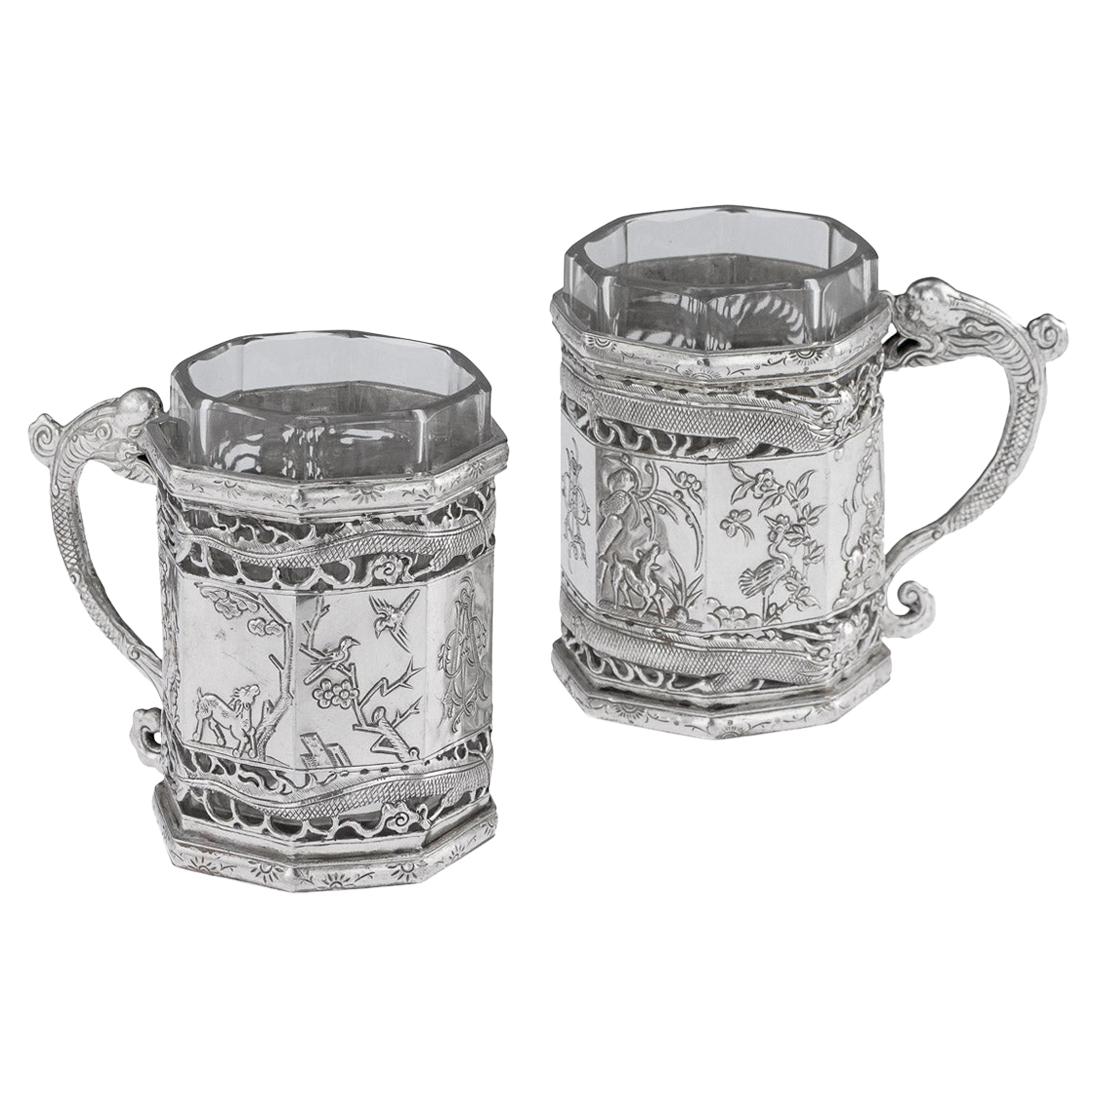 19th Century Chinese Export Solid Silver Tea Glass Holders, Canton, circa 1880